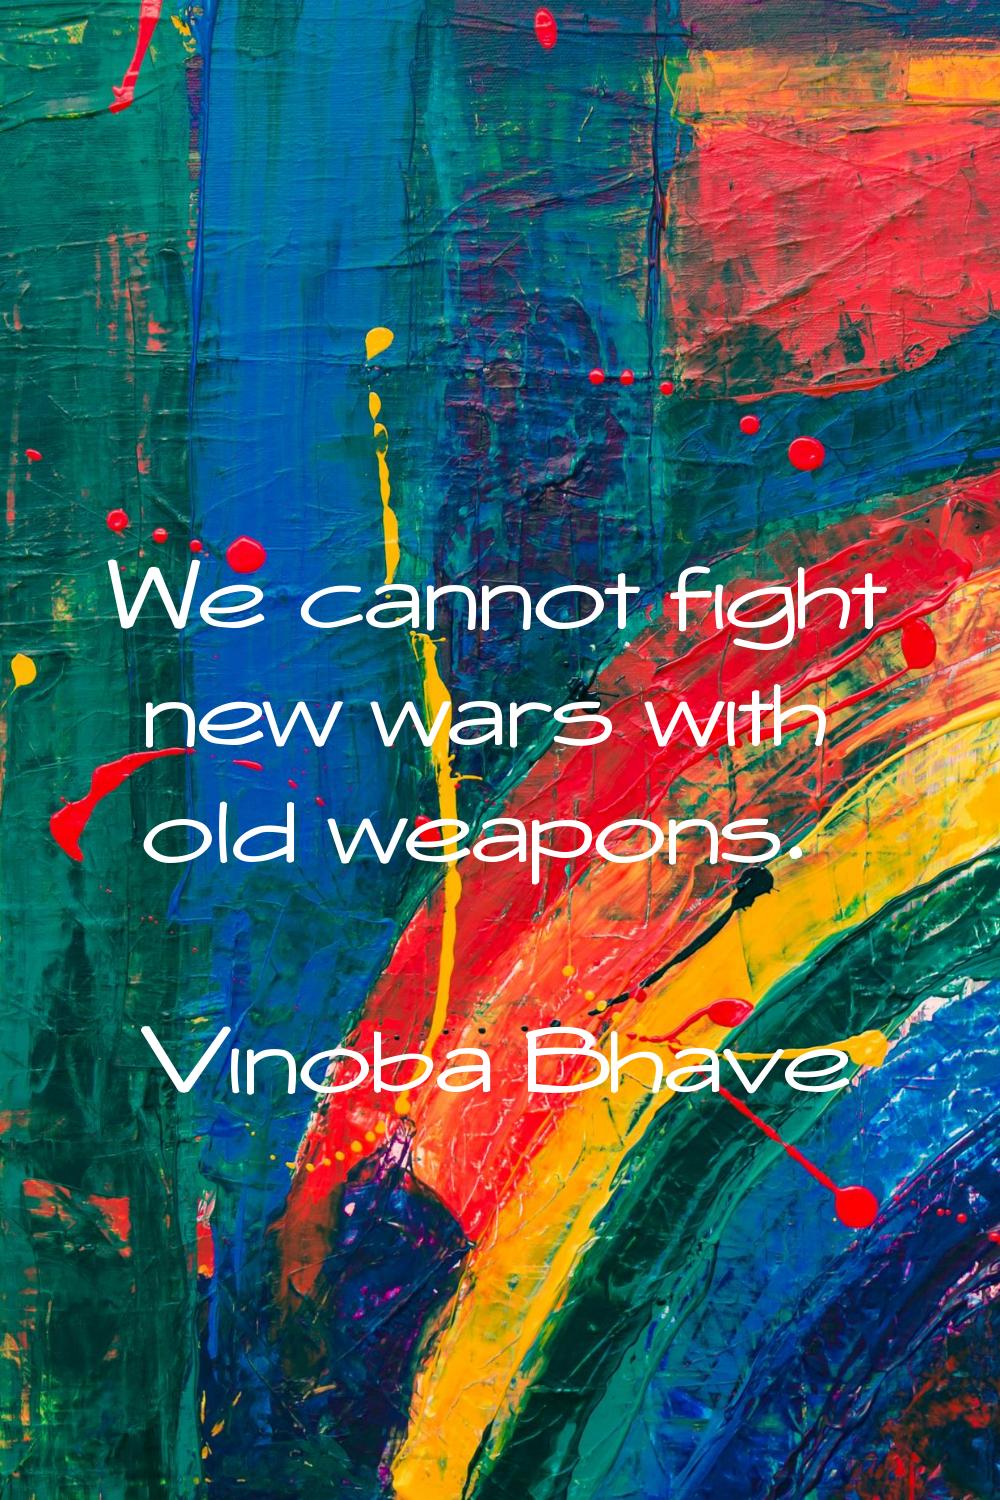 We cannot fight new wars with old weapons.